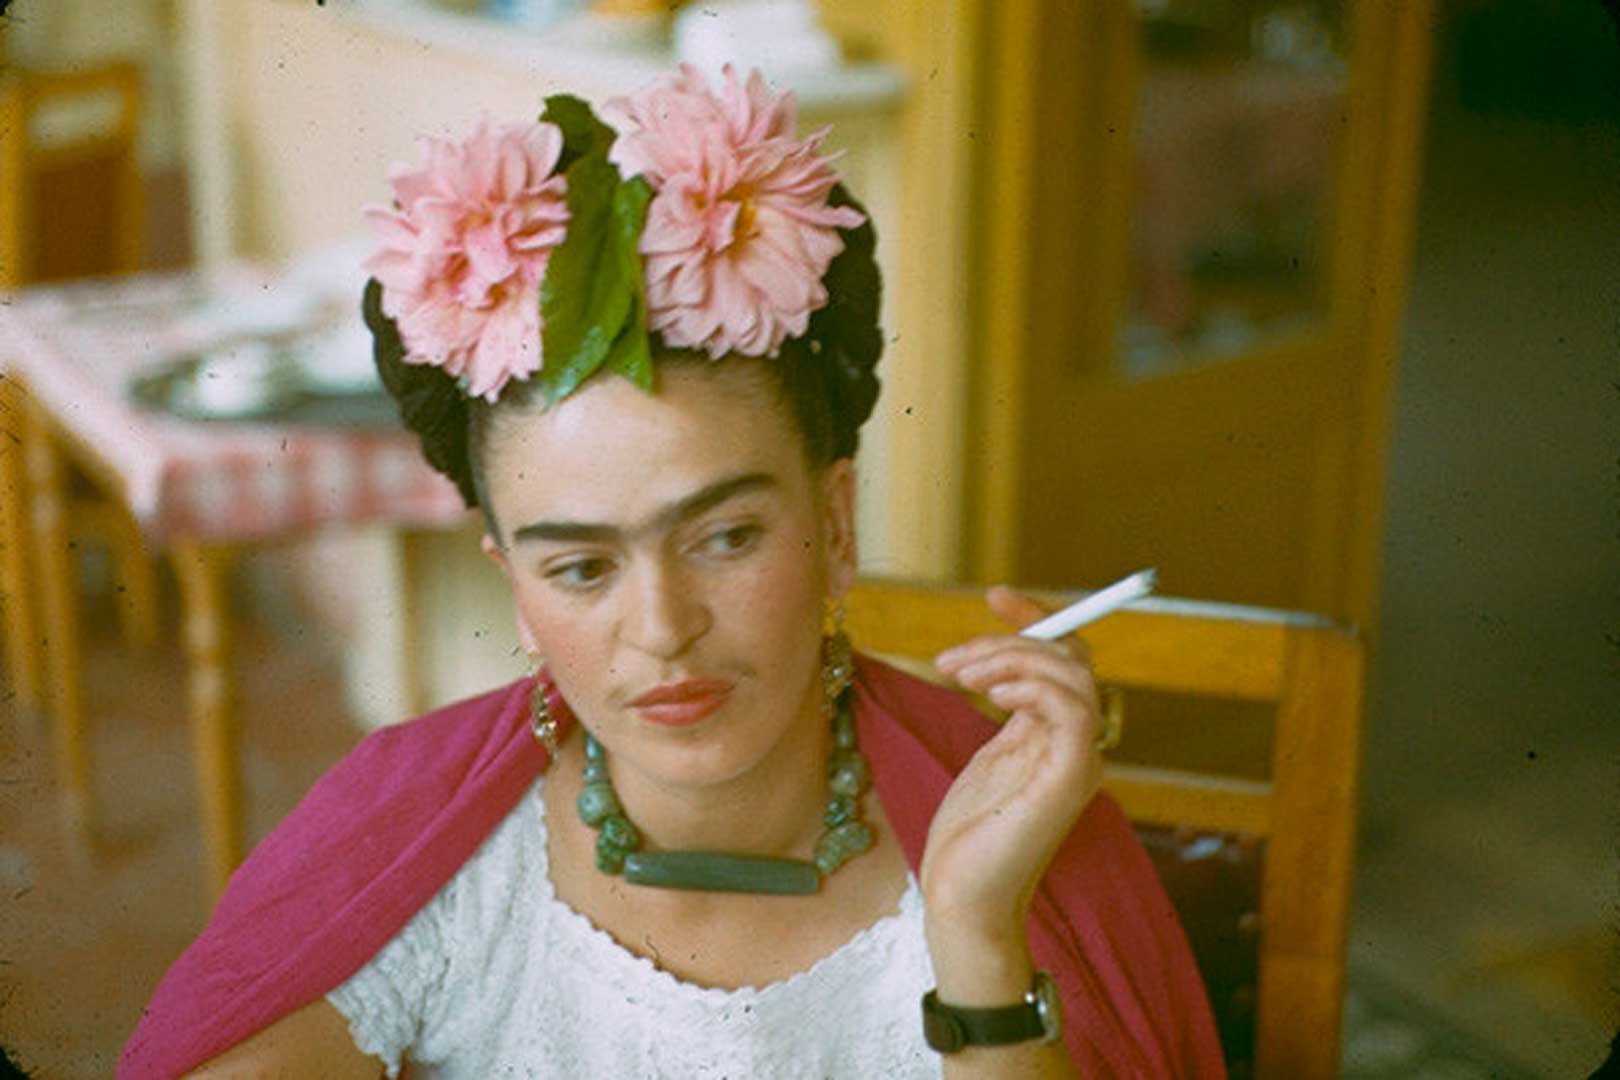 Search results for "frida kahlo"